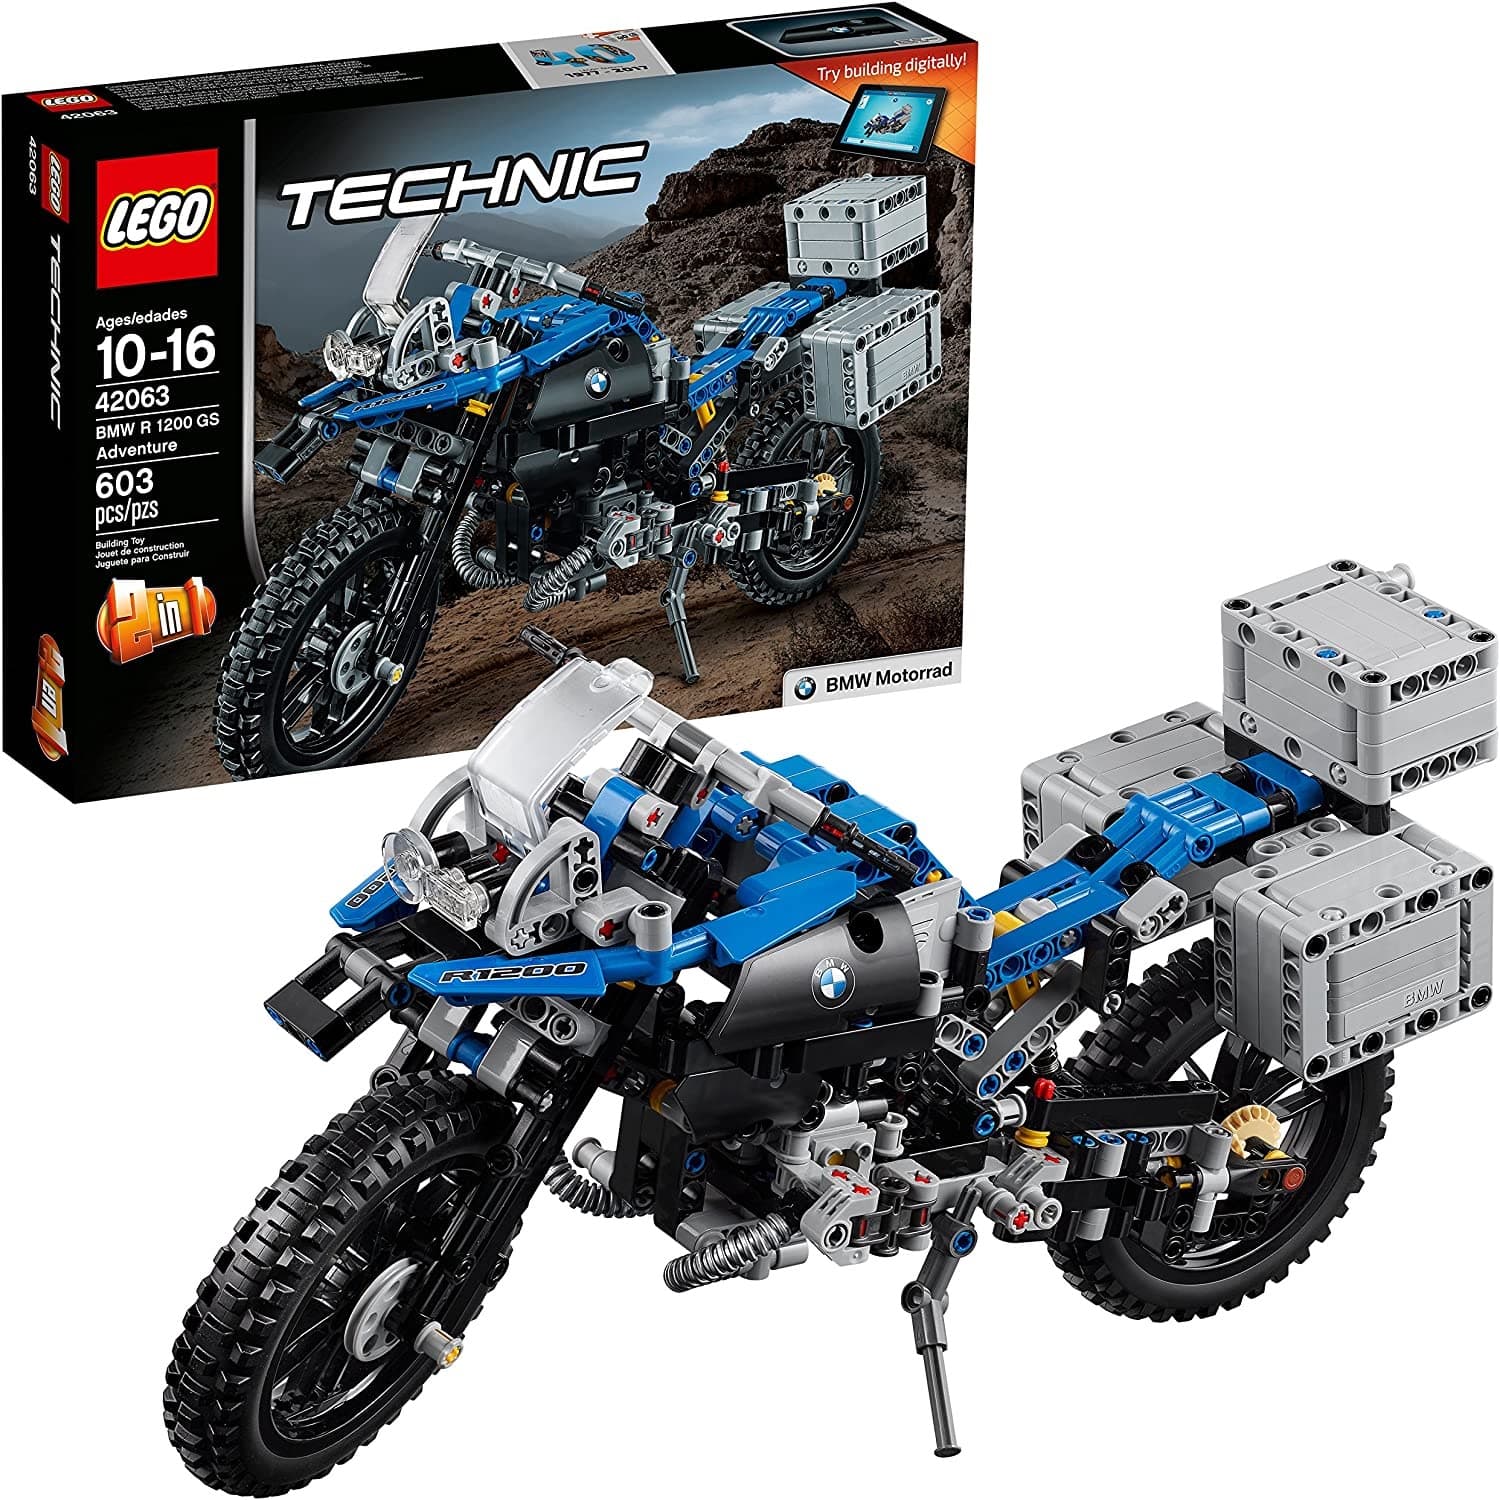 Gift ideas for motorcyclists — lego technic BMW R1200GS with box